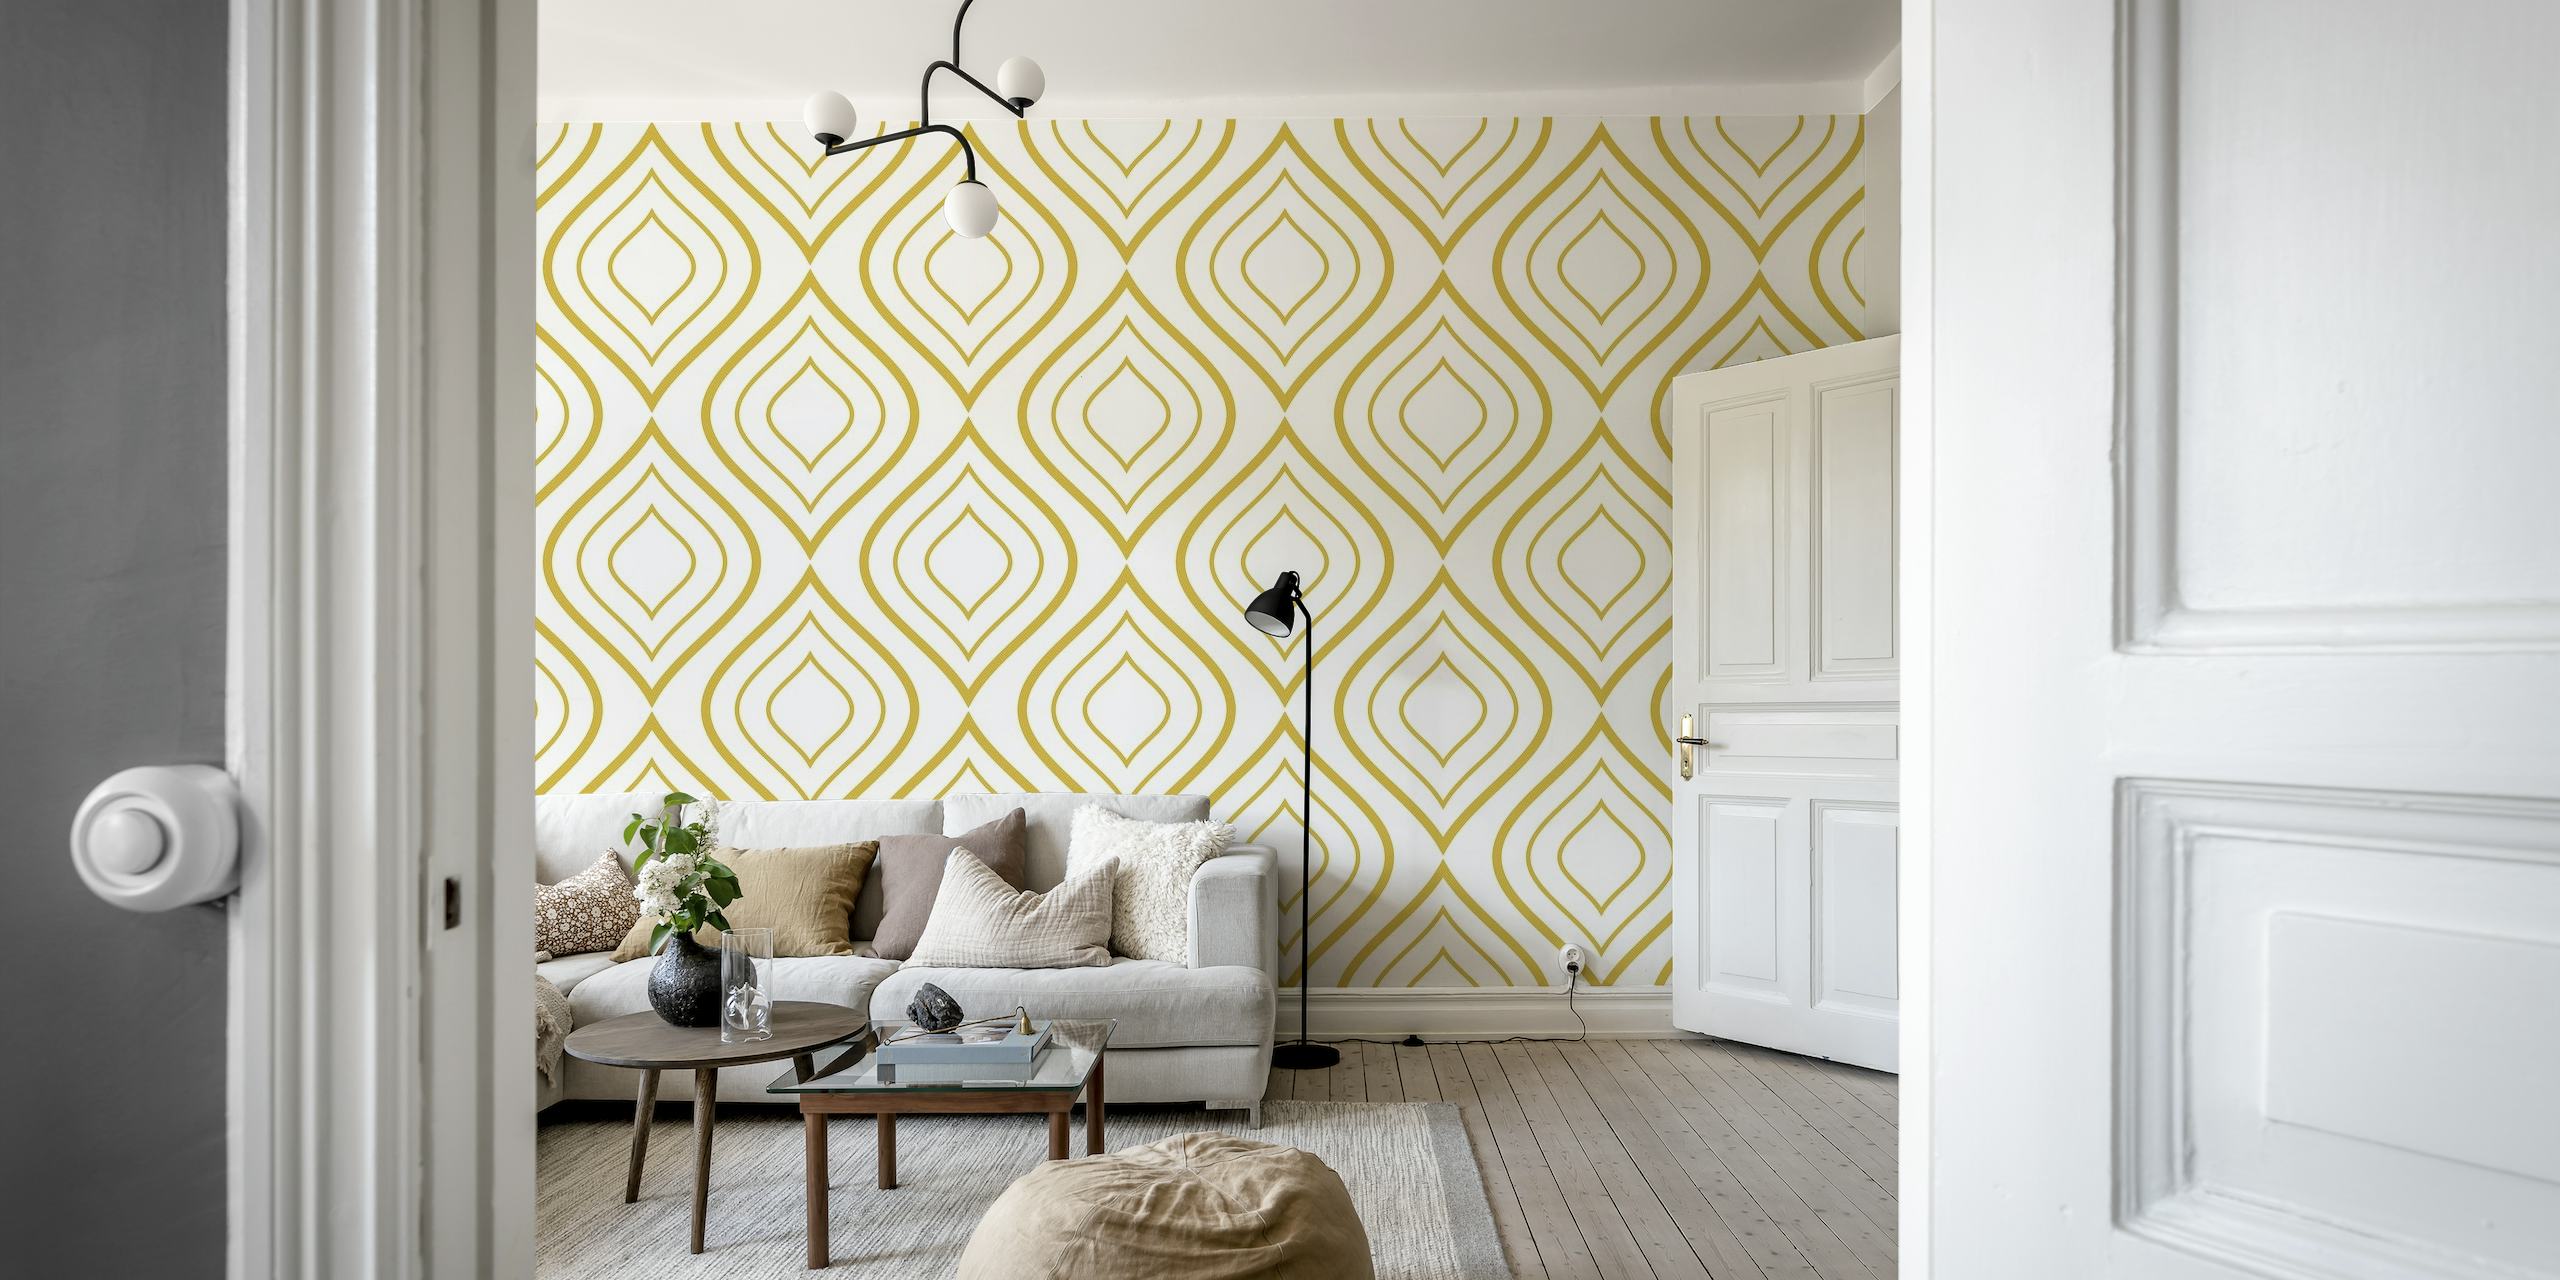 Gold and white abstract geometric wall mural design